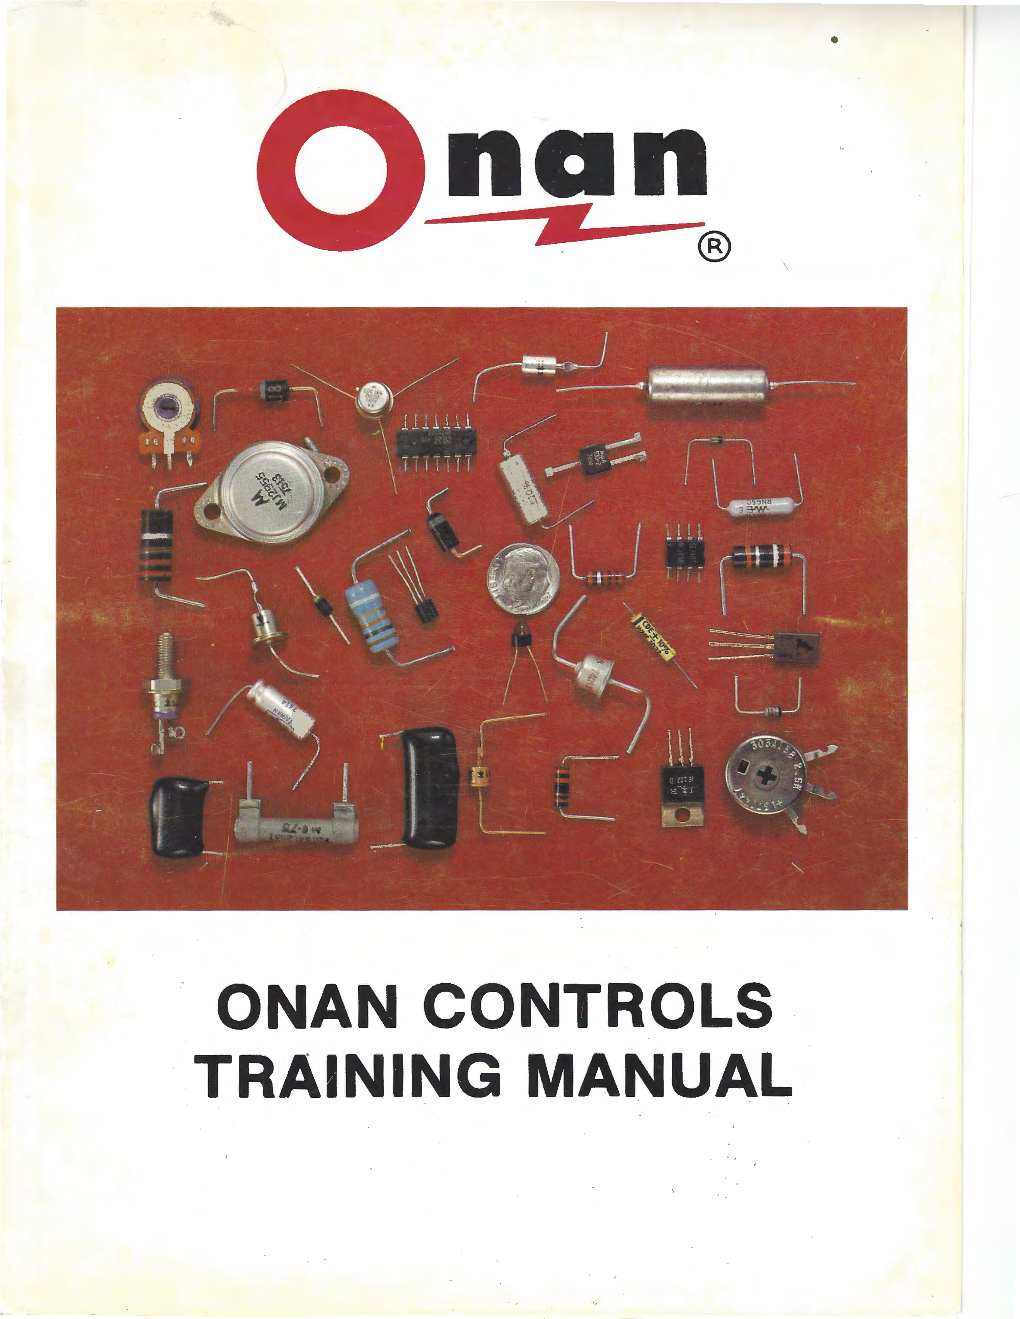 ONAN CONTROLS TRAINING MANUAL Onan Plant the Onan Plant Is Located in the Suburb of Fridley on the North Side of Minneapolis